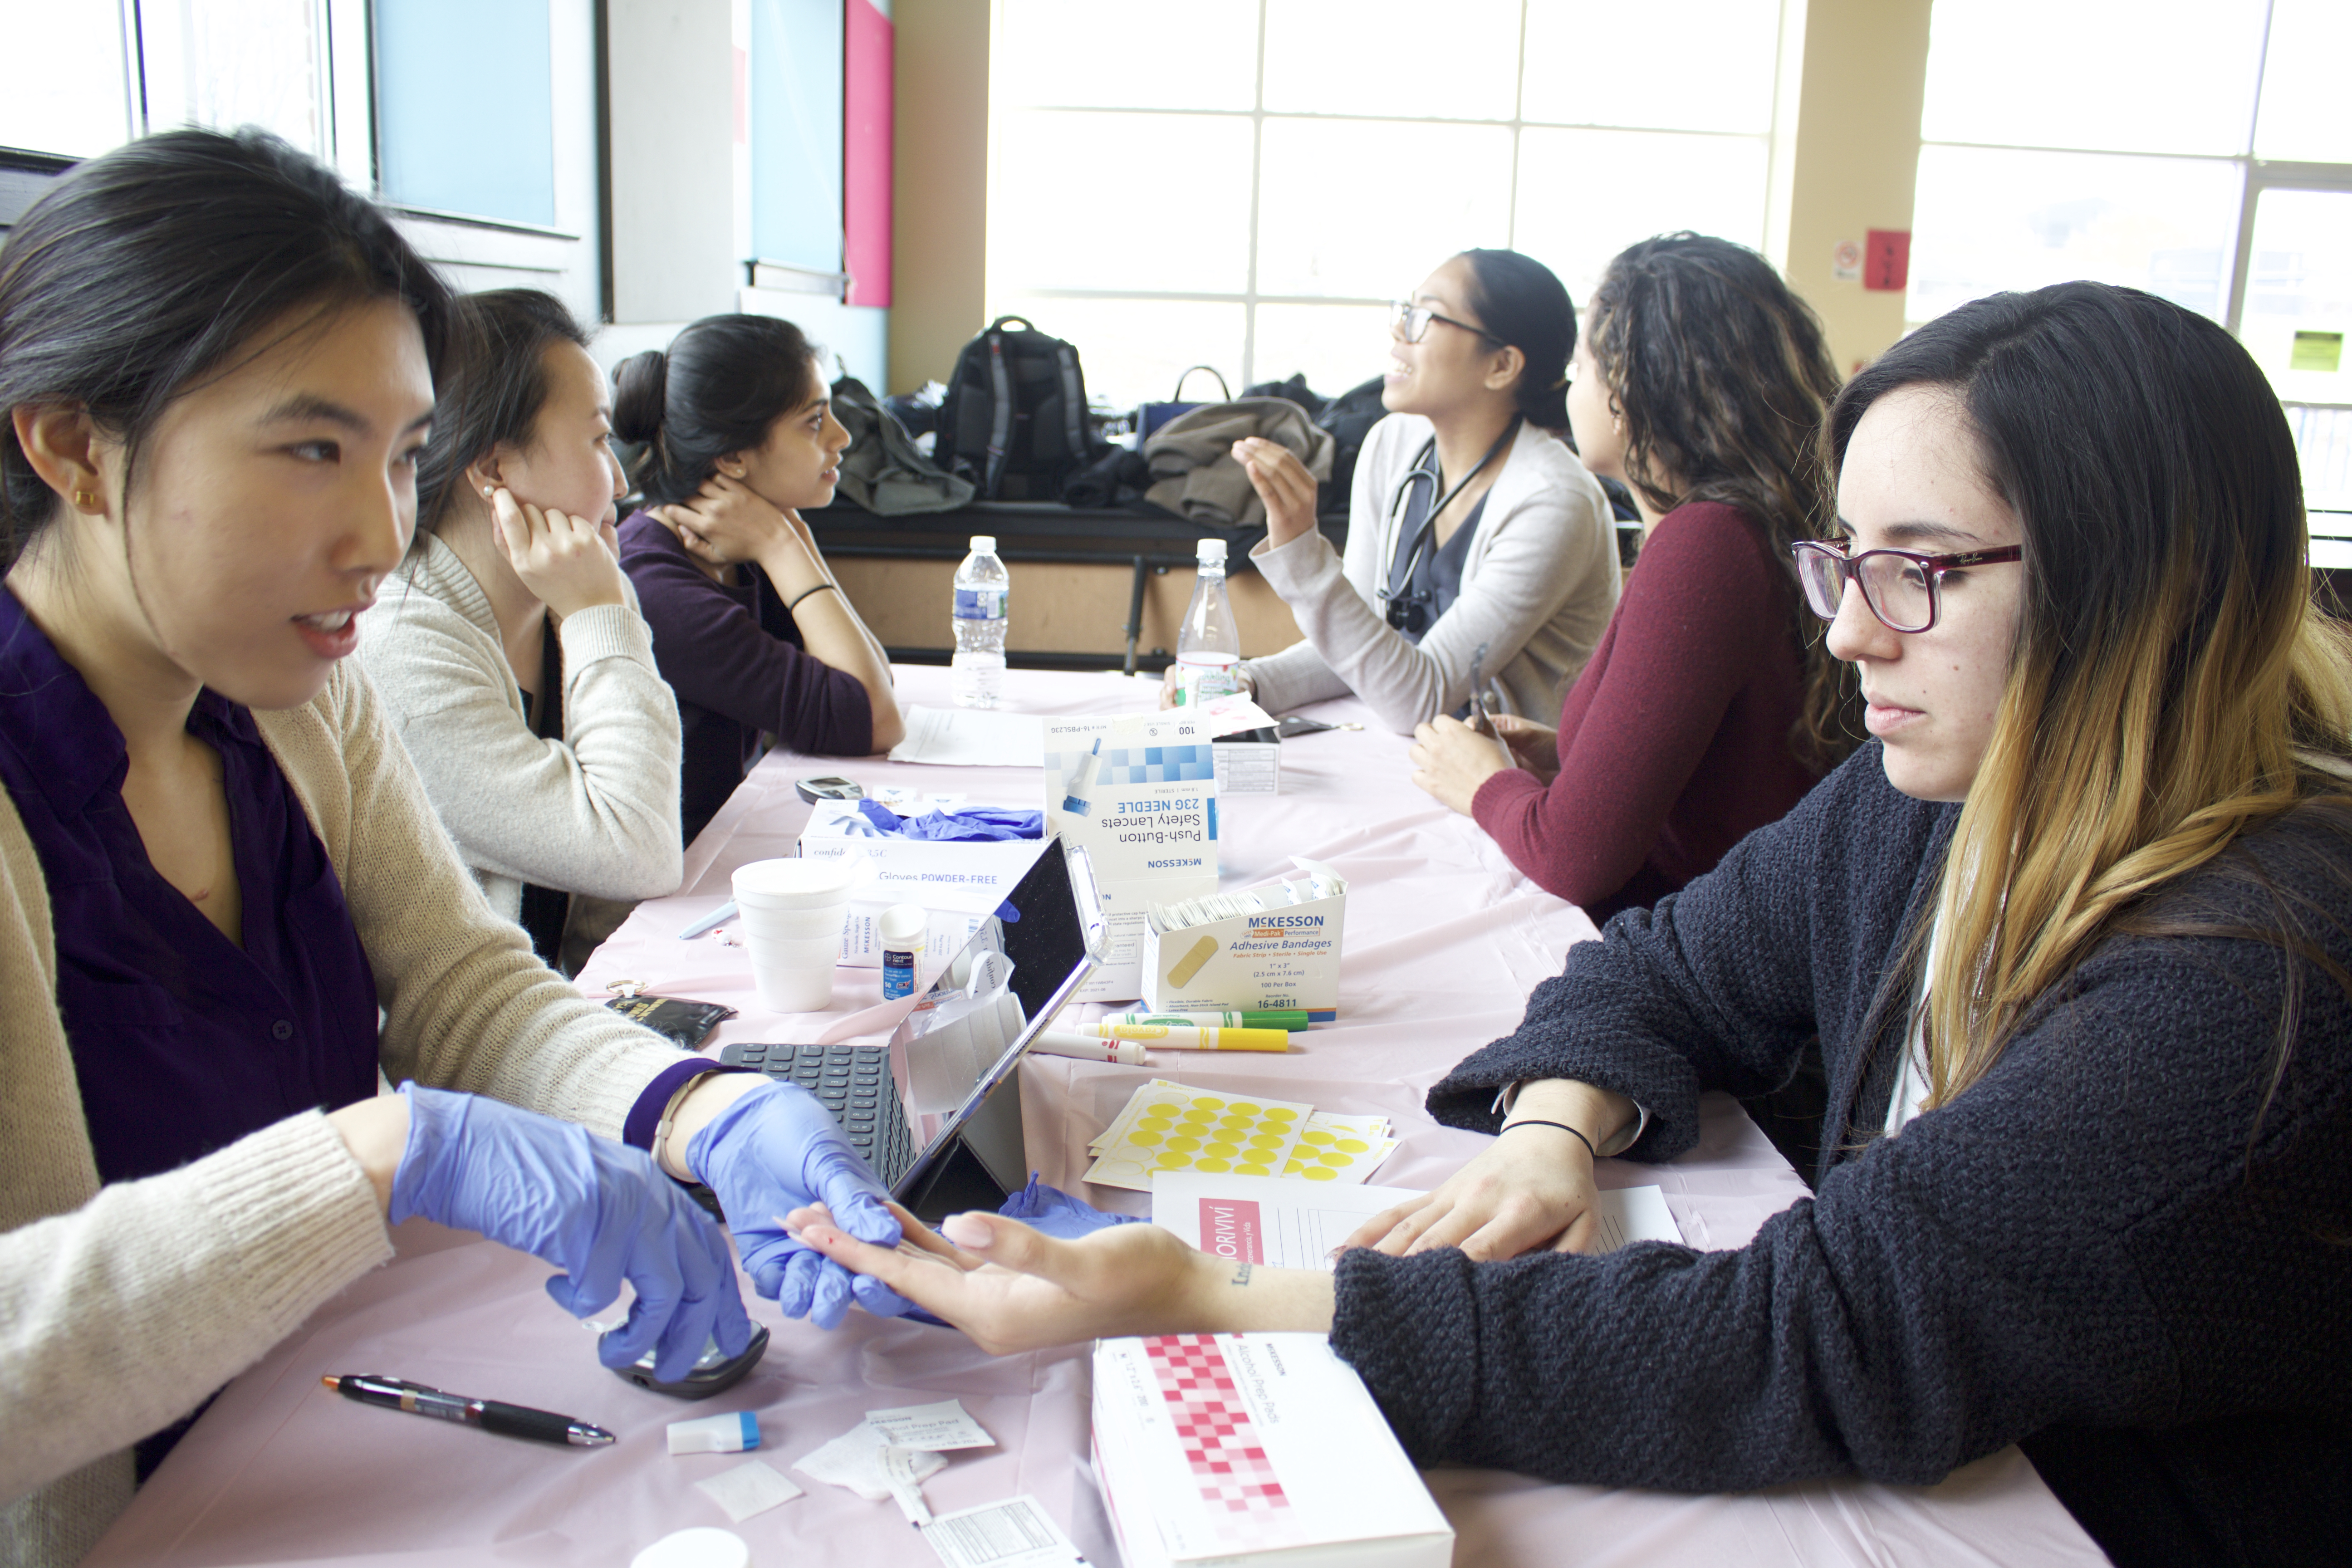 Students at the Latino health fair on March 10. Photo: Emily Neil / AL DIA News